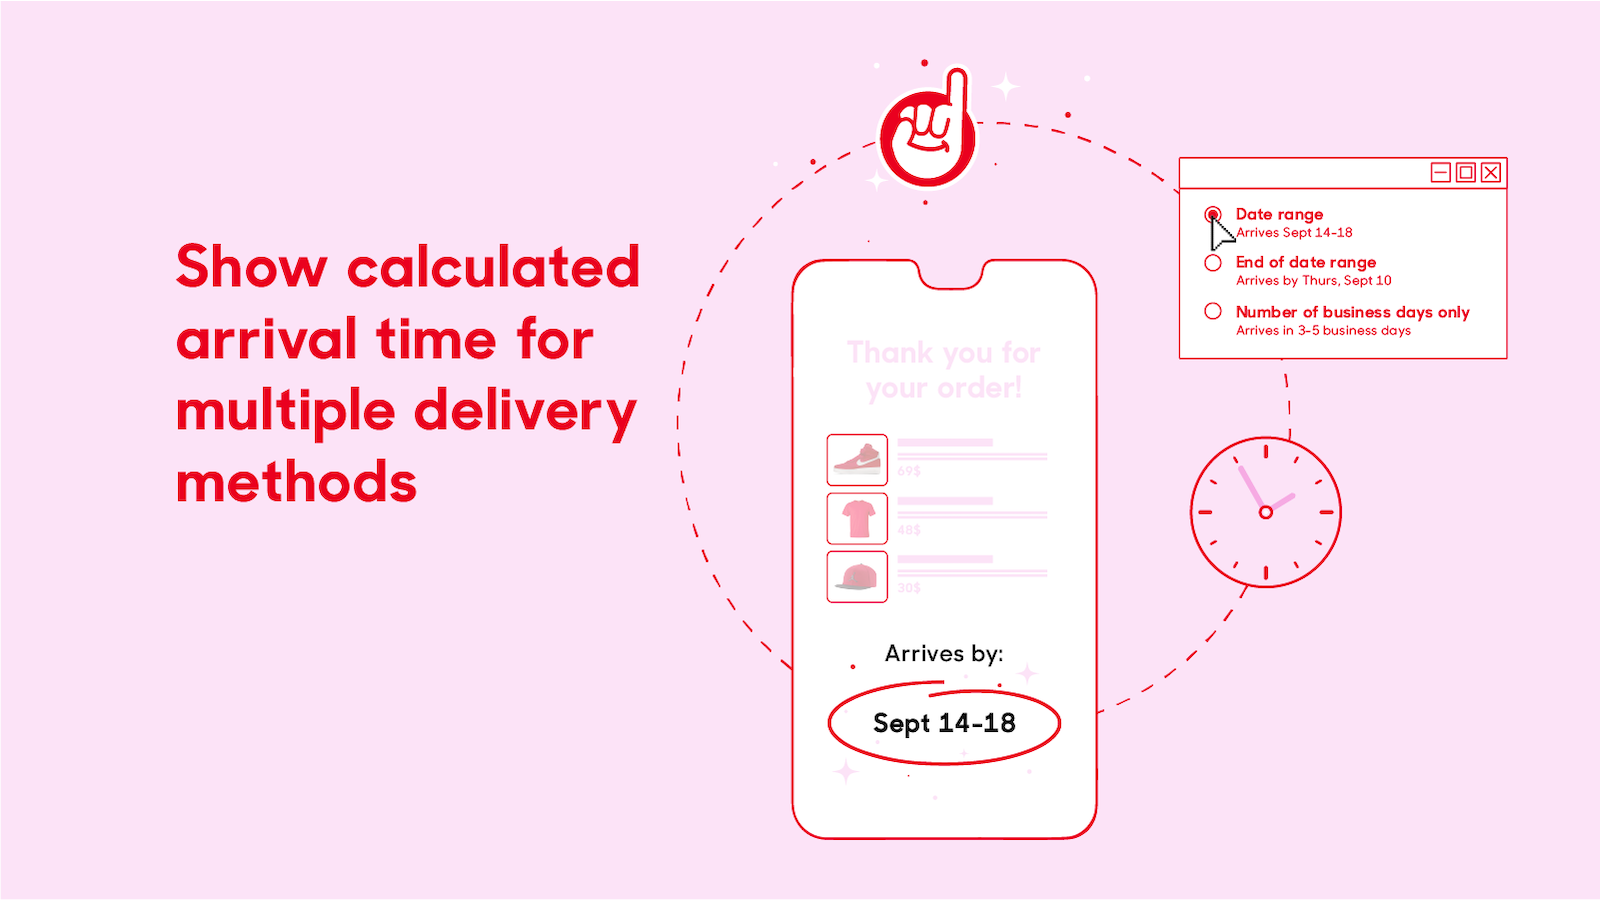 Show calculated arrival tim for multiple delivery methods